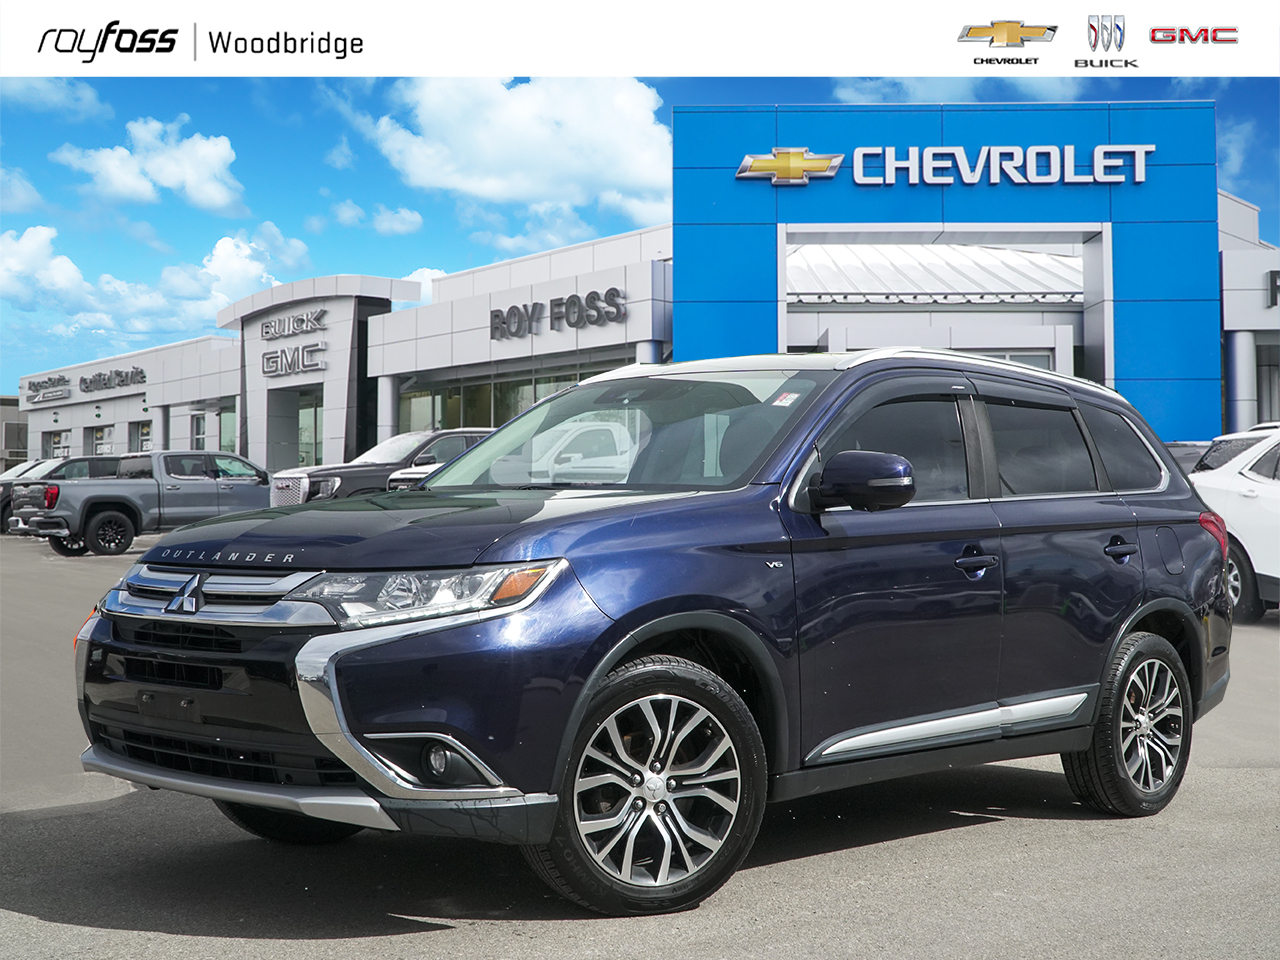 2017 Mitsubishi Outlander GT, 4WD, Sunroof, Leather, No Accidents!